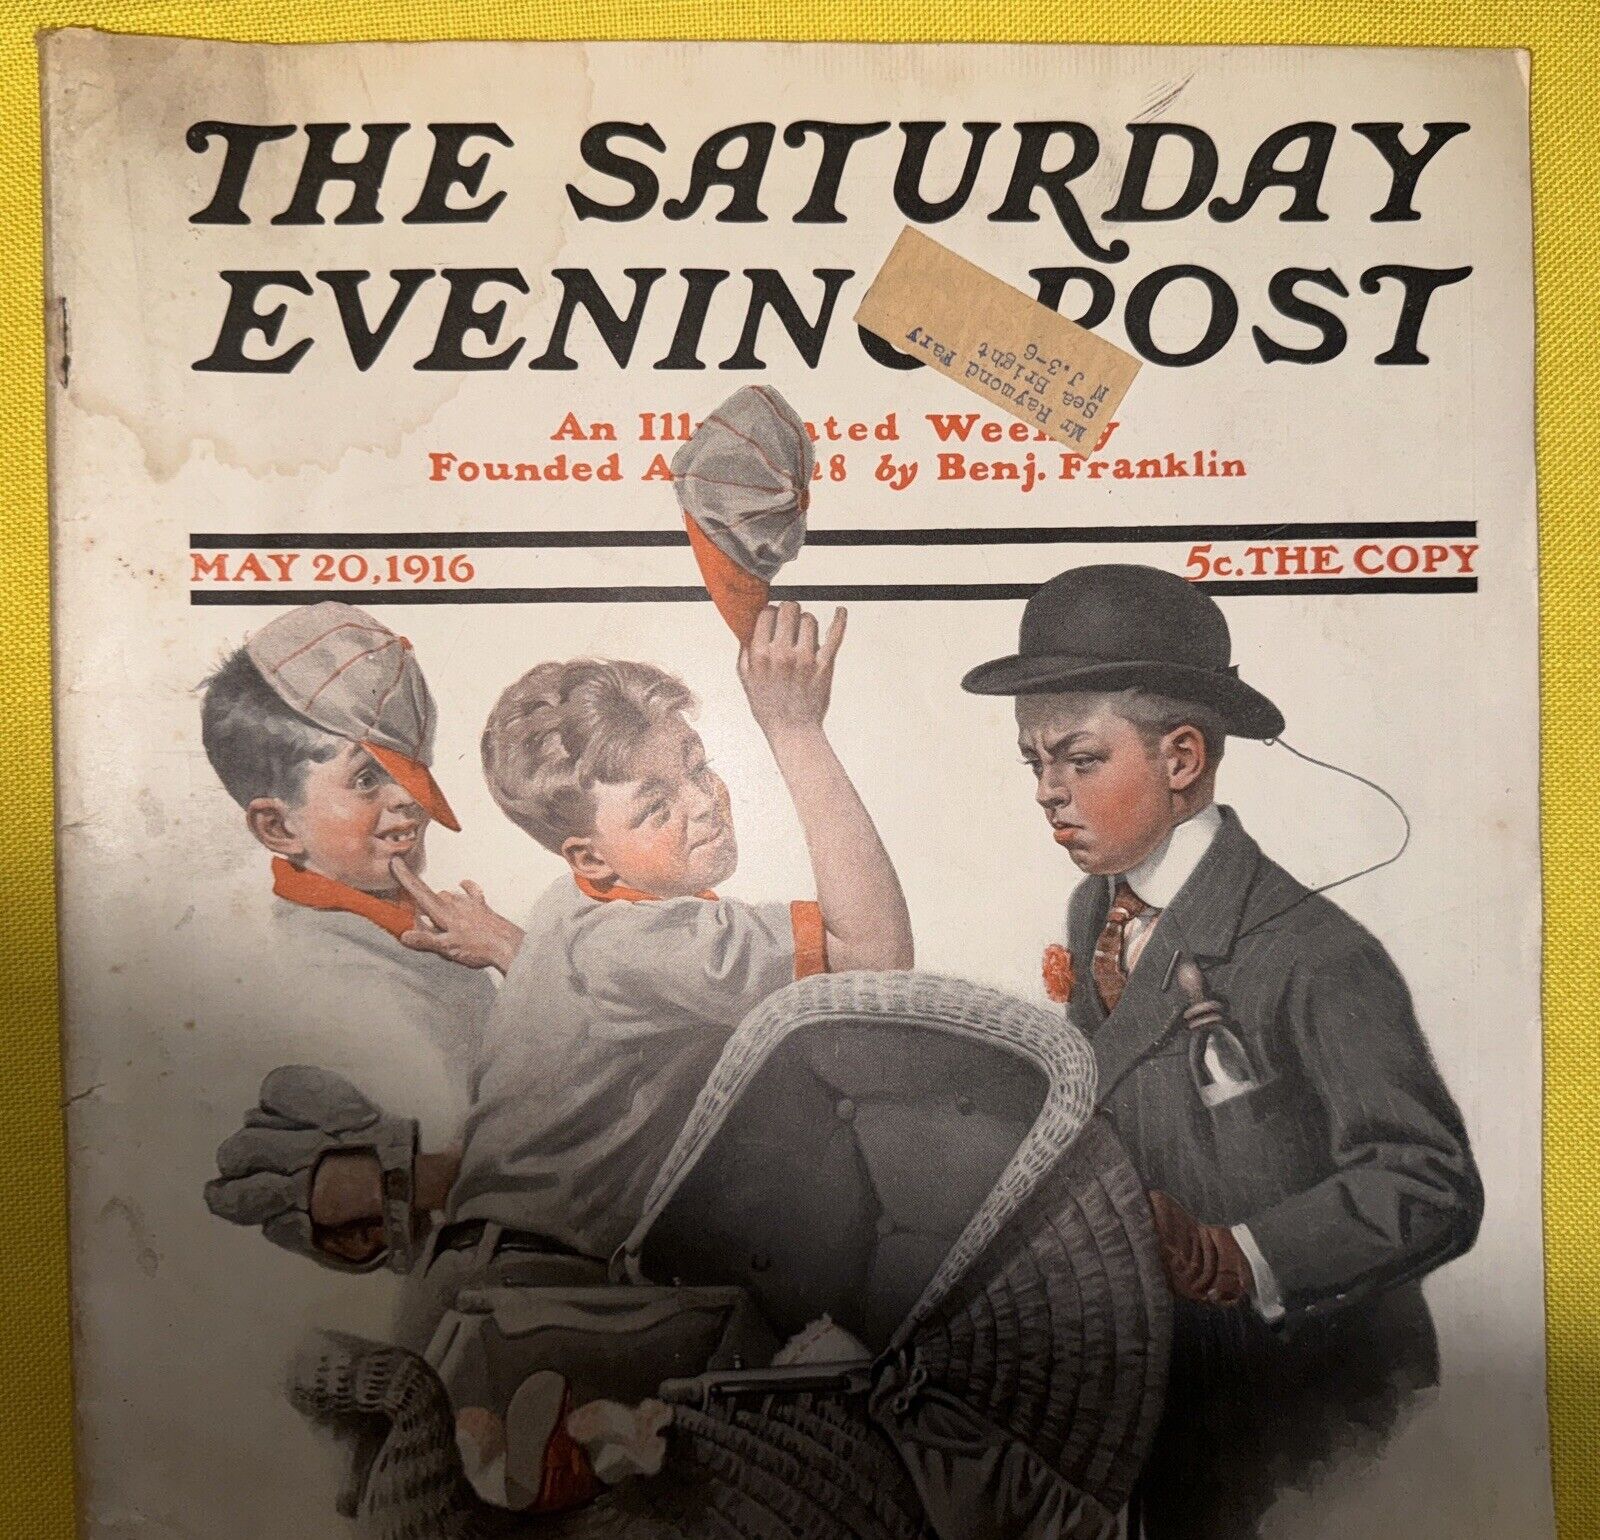 Saturday Evening Post May 20 1916—1st Norman Rockwell on cover. Full magazine